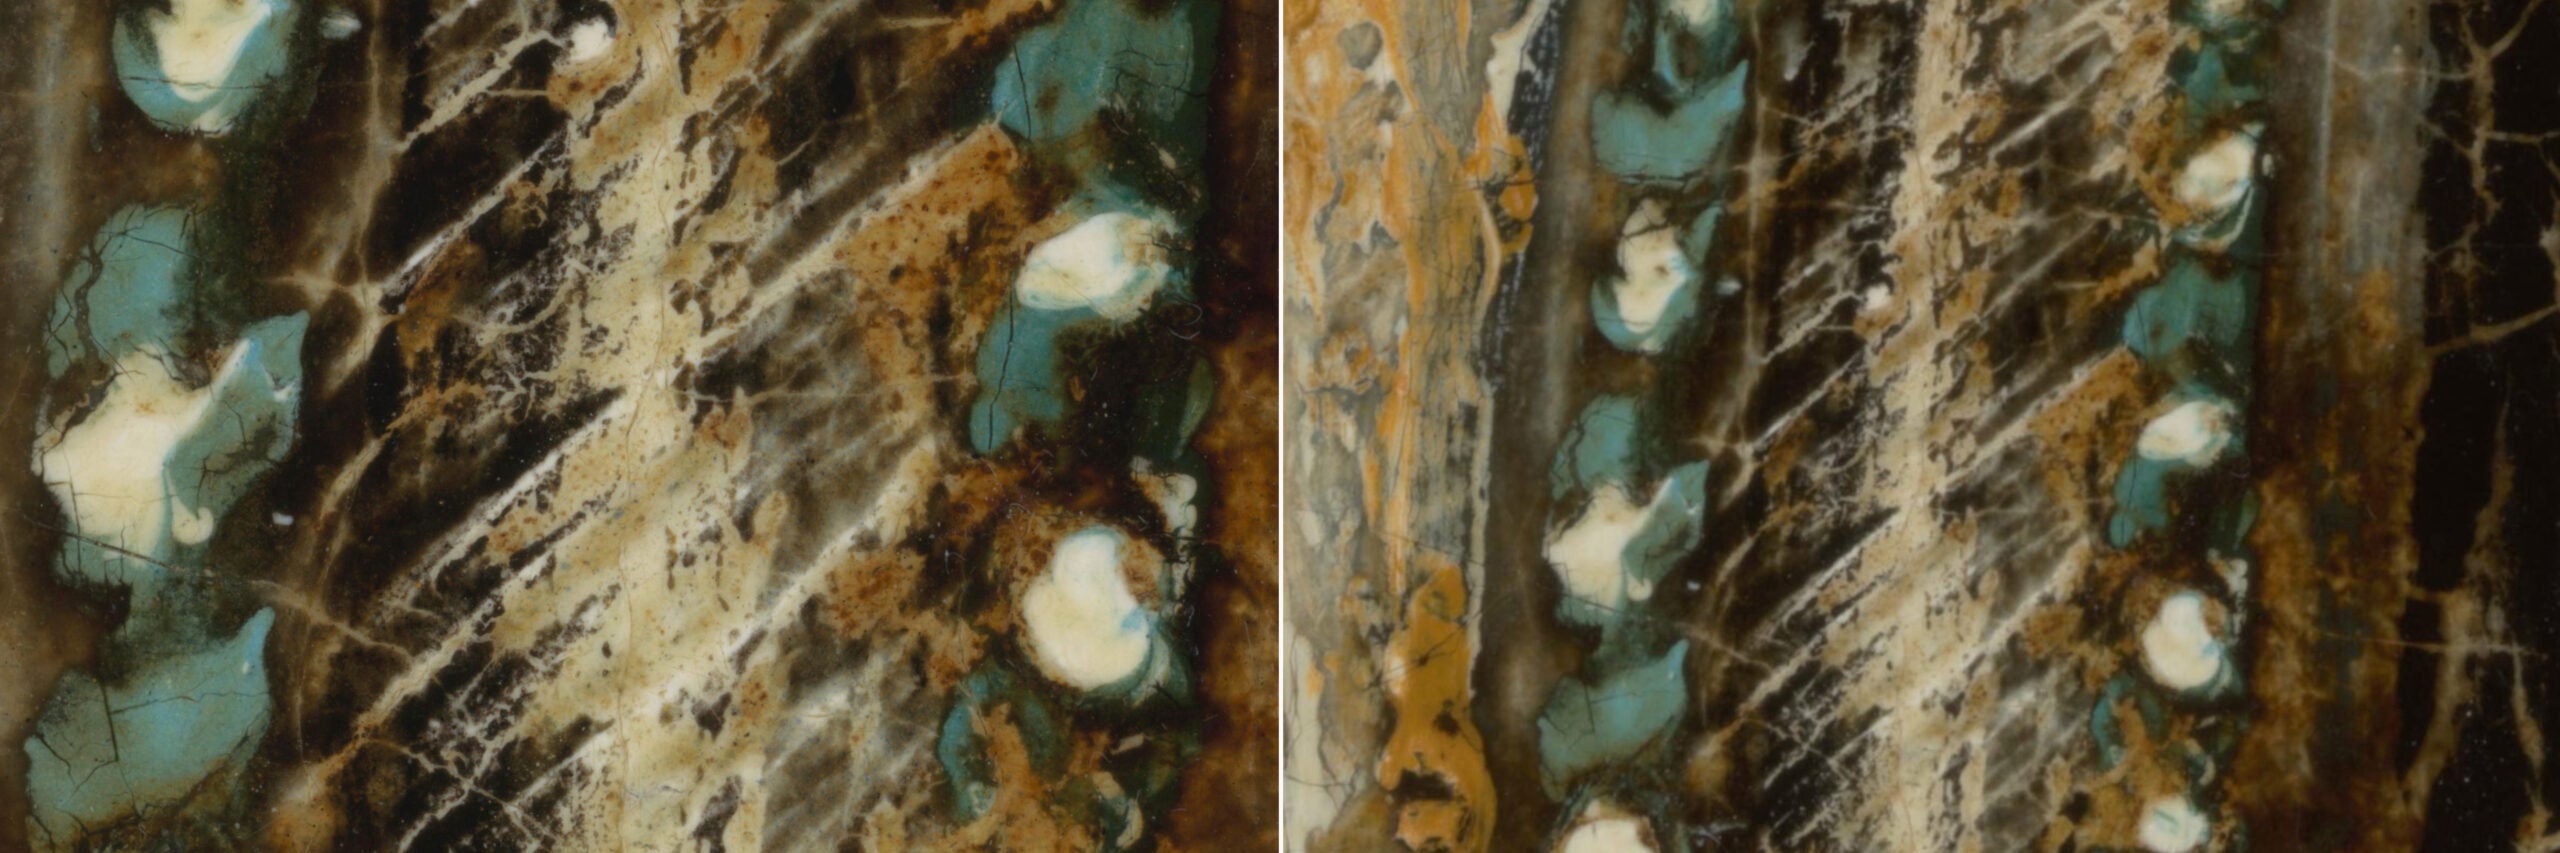 A detail comparison of the most recent scan (left) and previous 44.8-gigapixel scan.